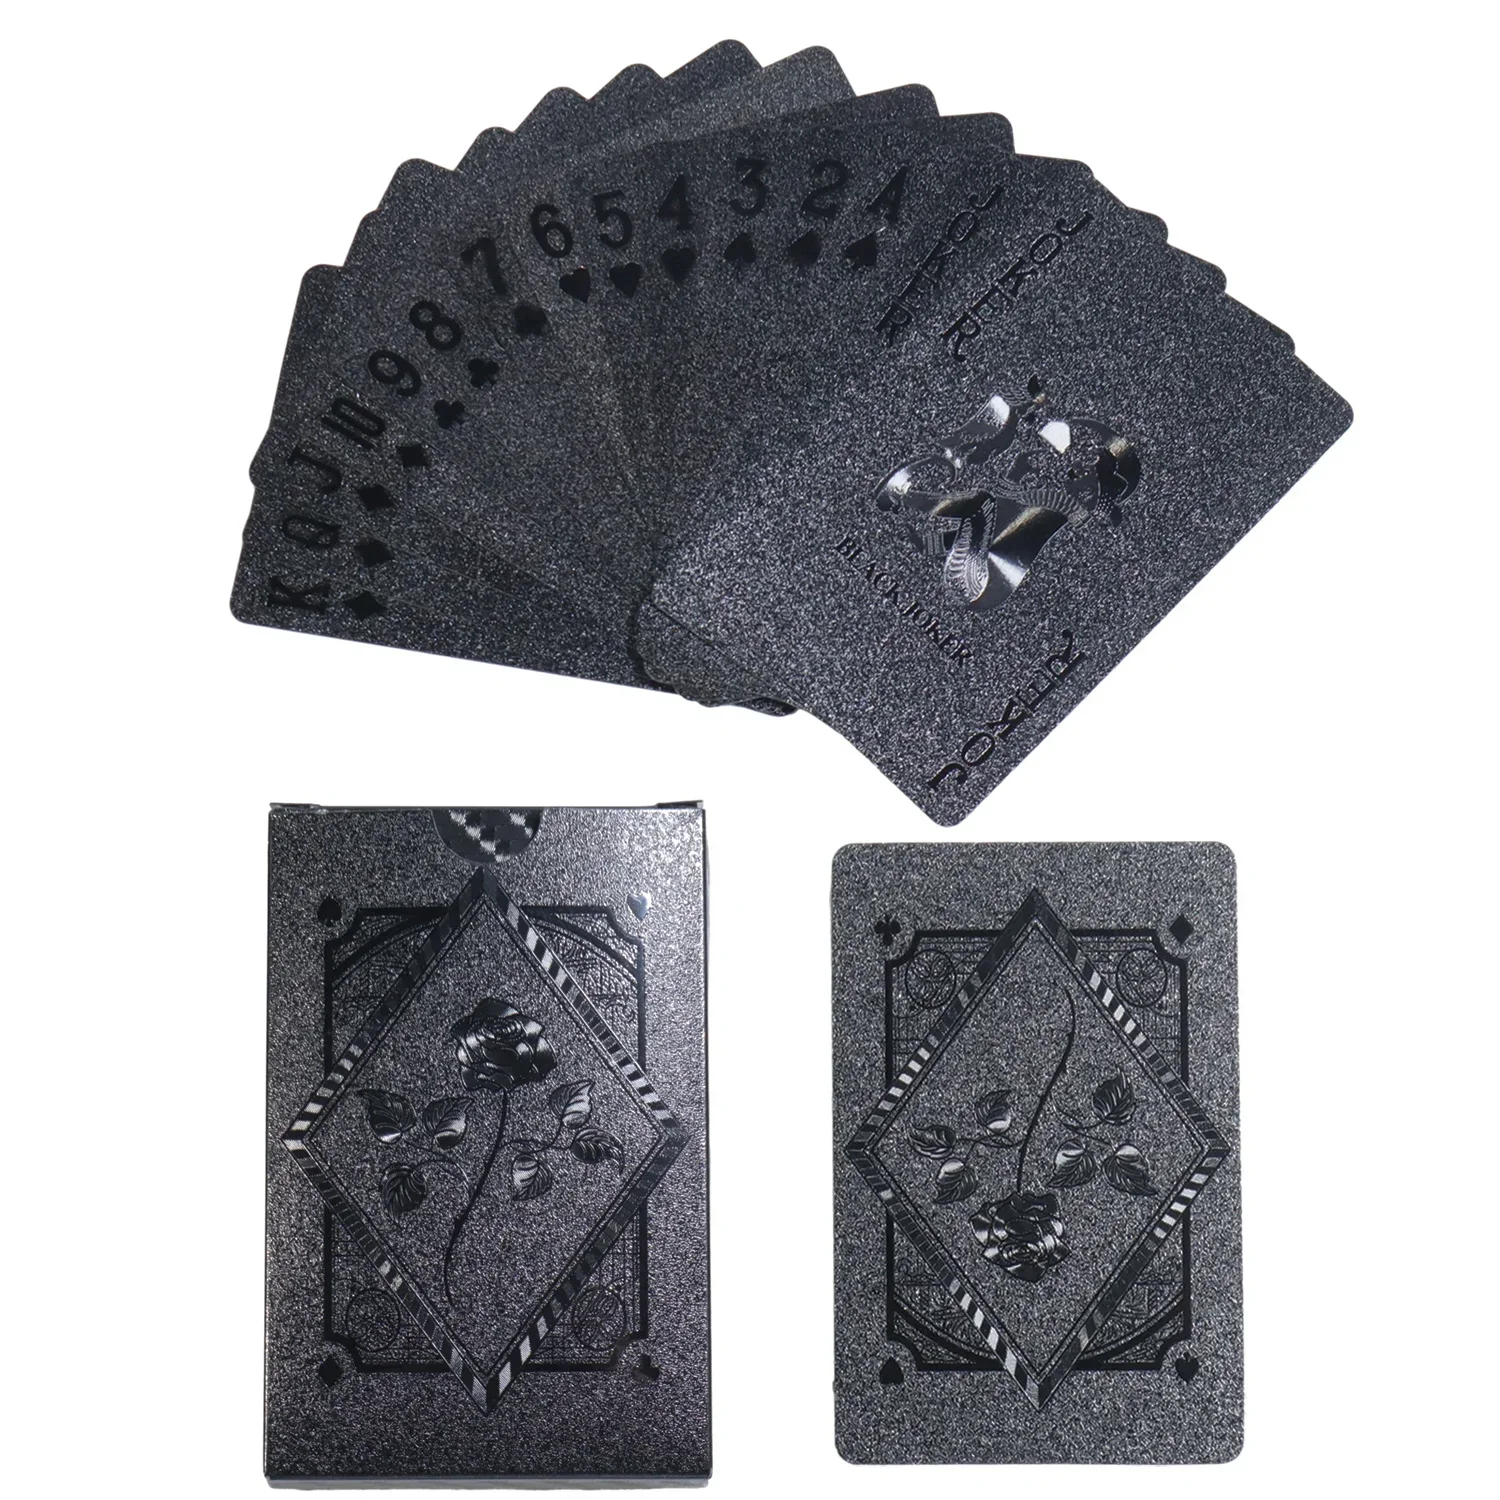 

Cool Black Foil Playing Cards the Black Pearl Game Poker Carta Waterproof Playing Cards Black Rose Skull Dollar Deck of Cards